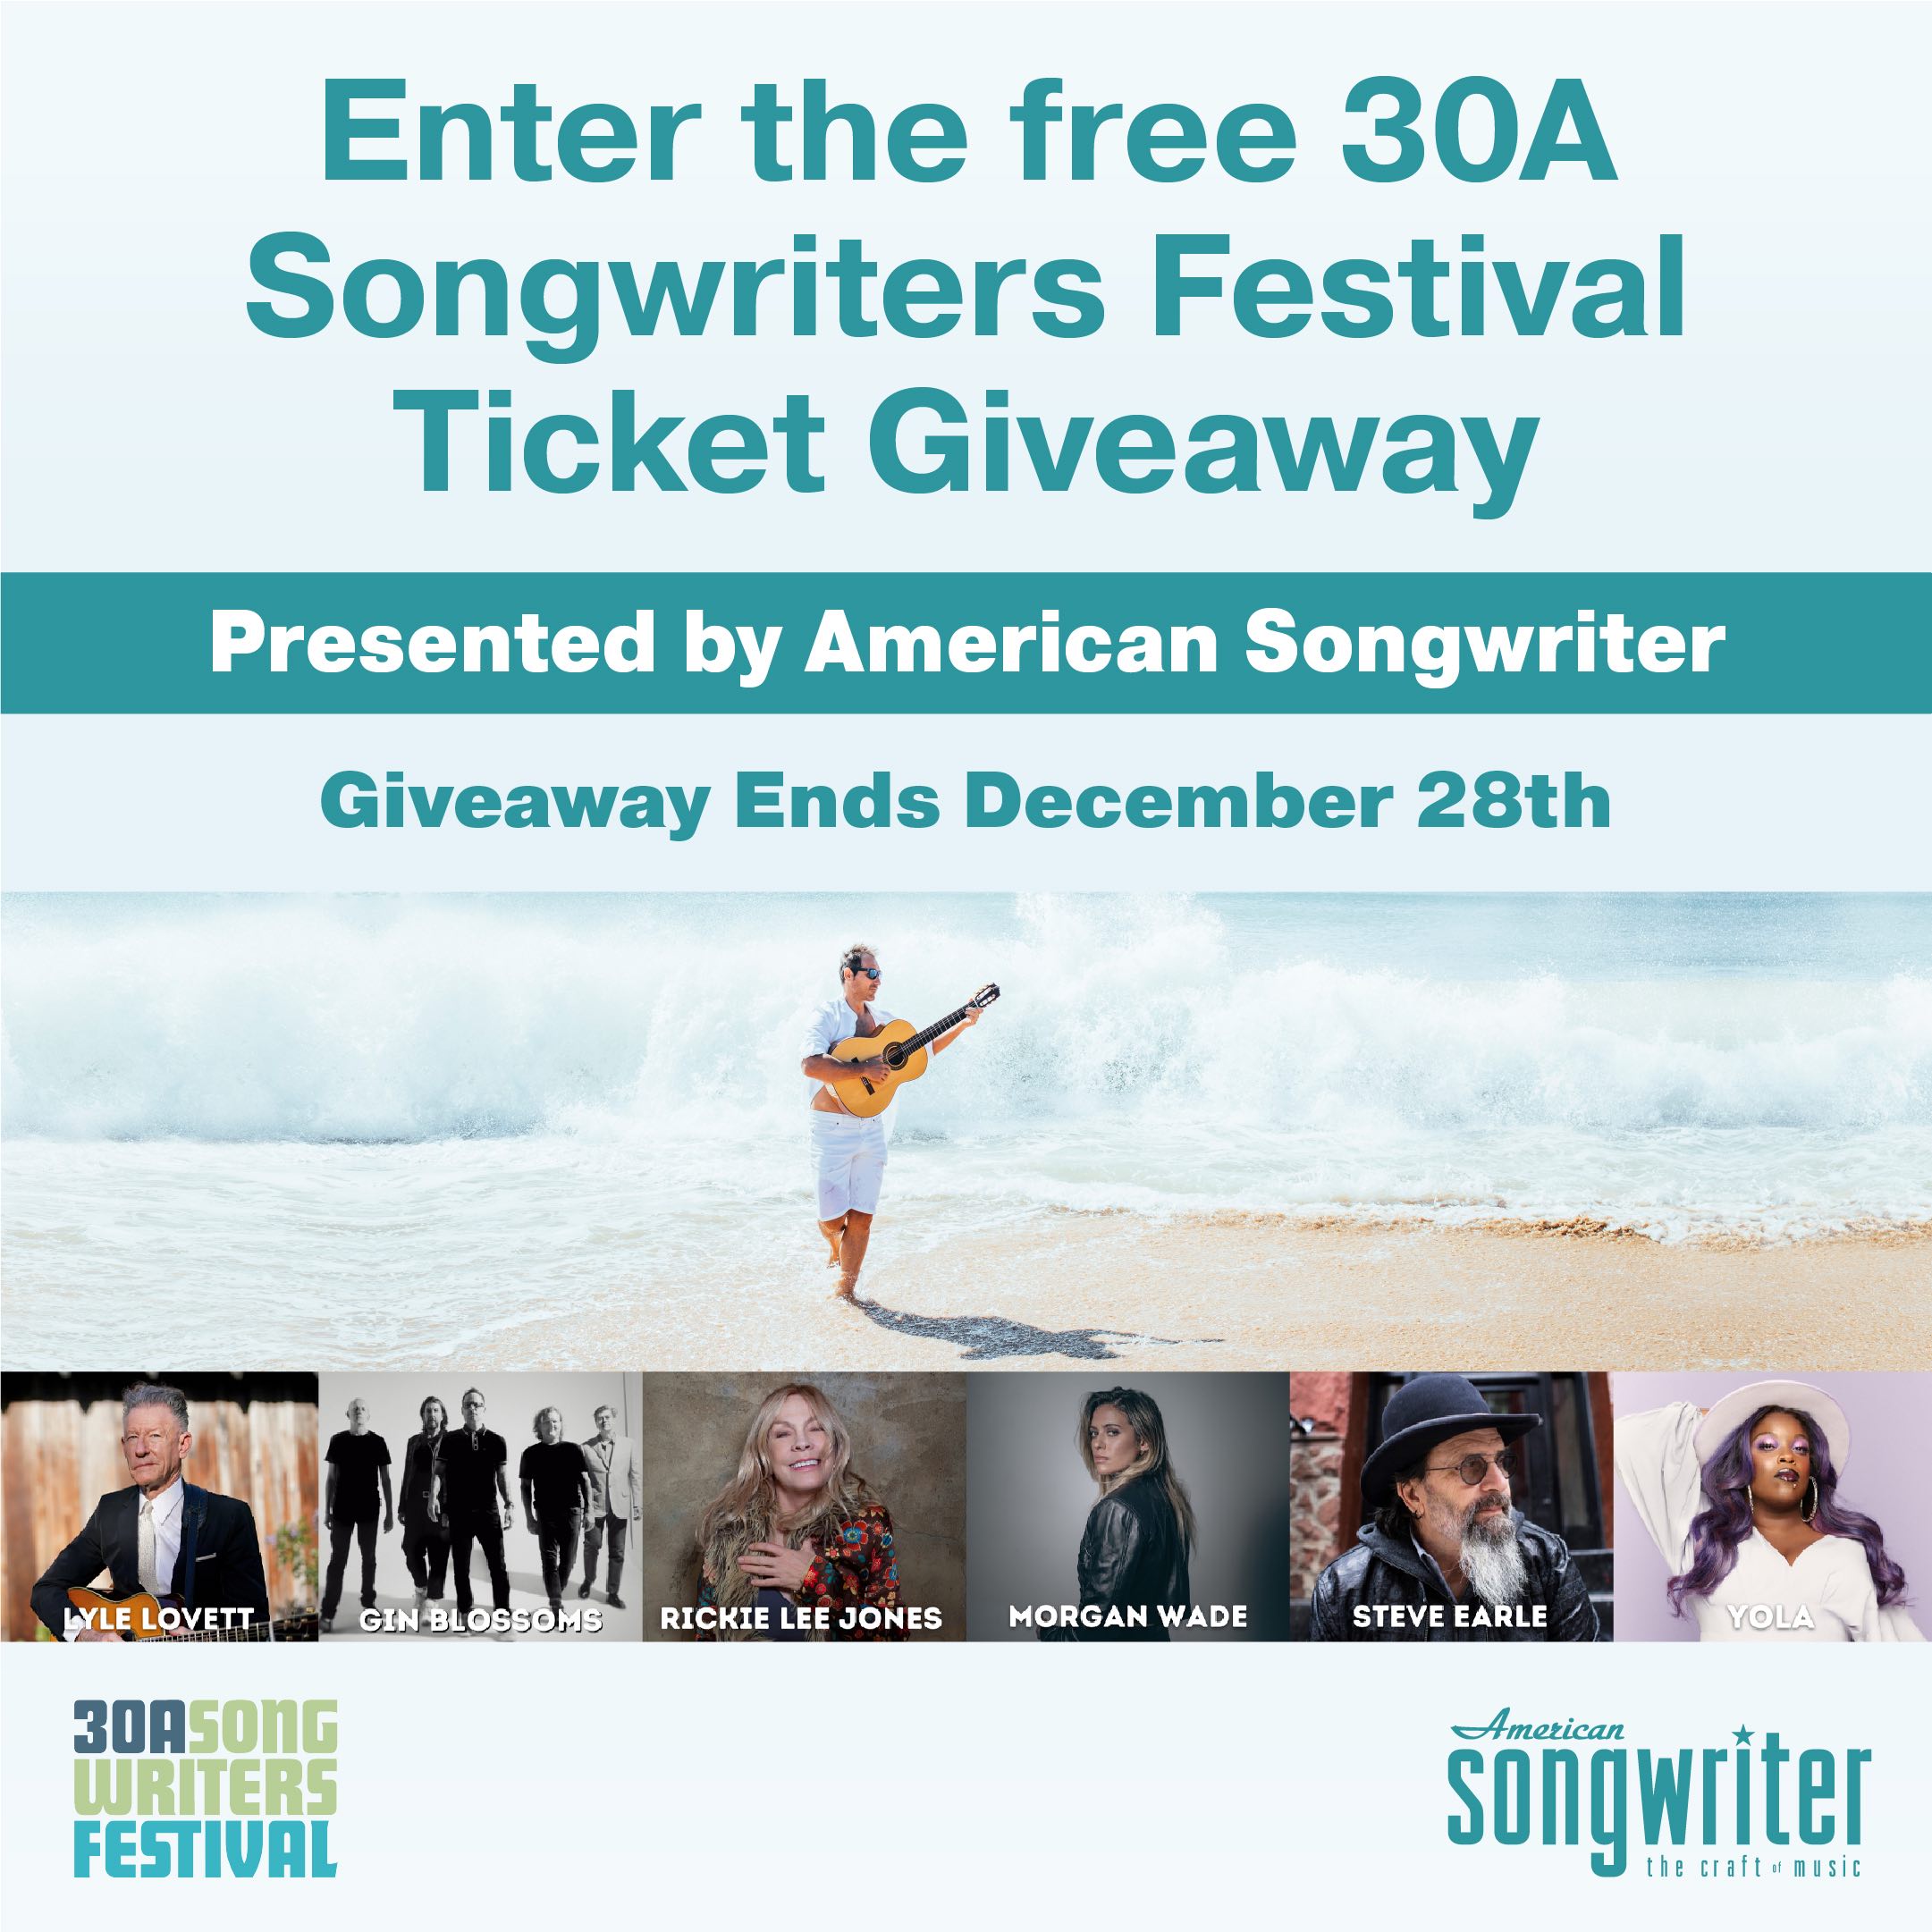 30A Songwriters Festival Ticket Giveaway American Songwriter